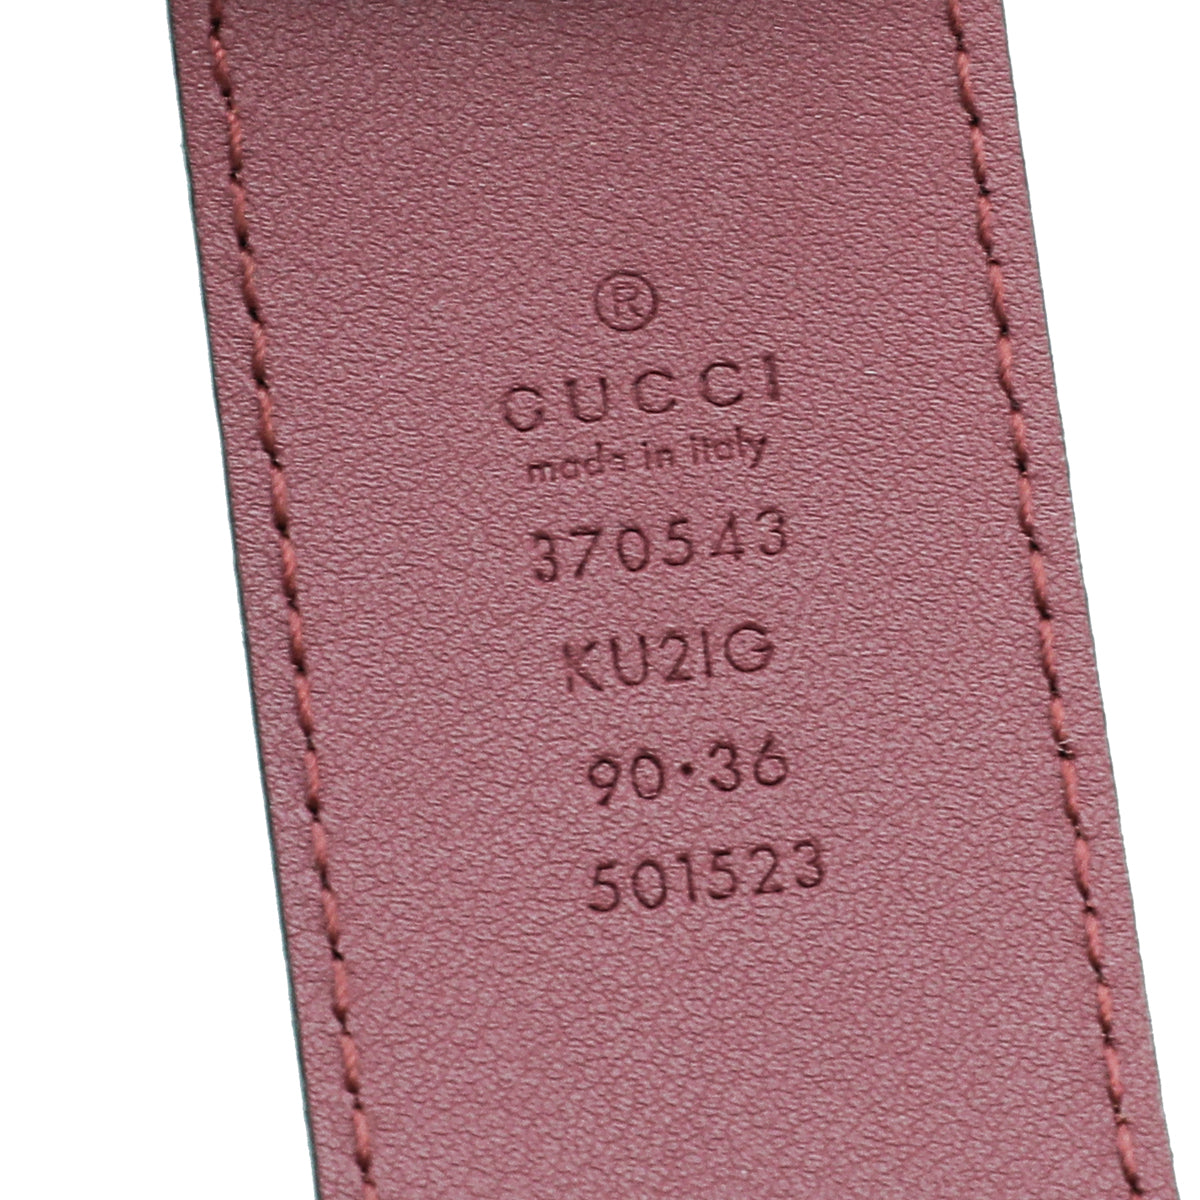 Gucci Dusty Pink Multicolor Double G Blooms Print Belt 36